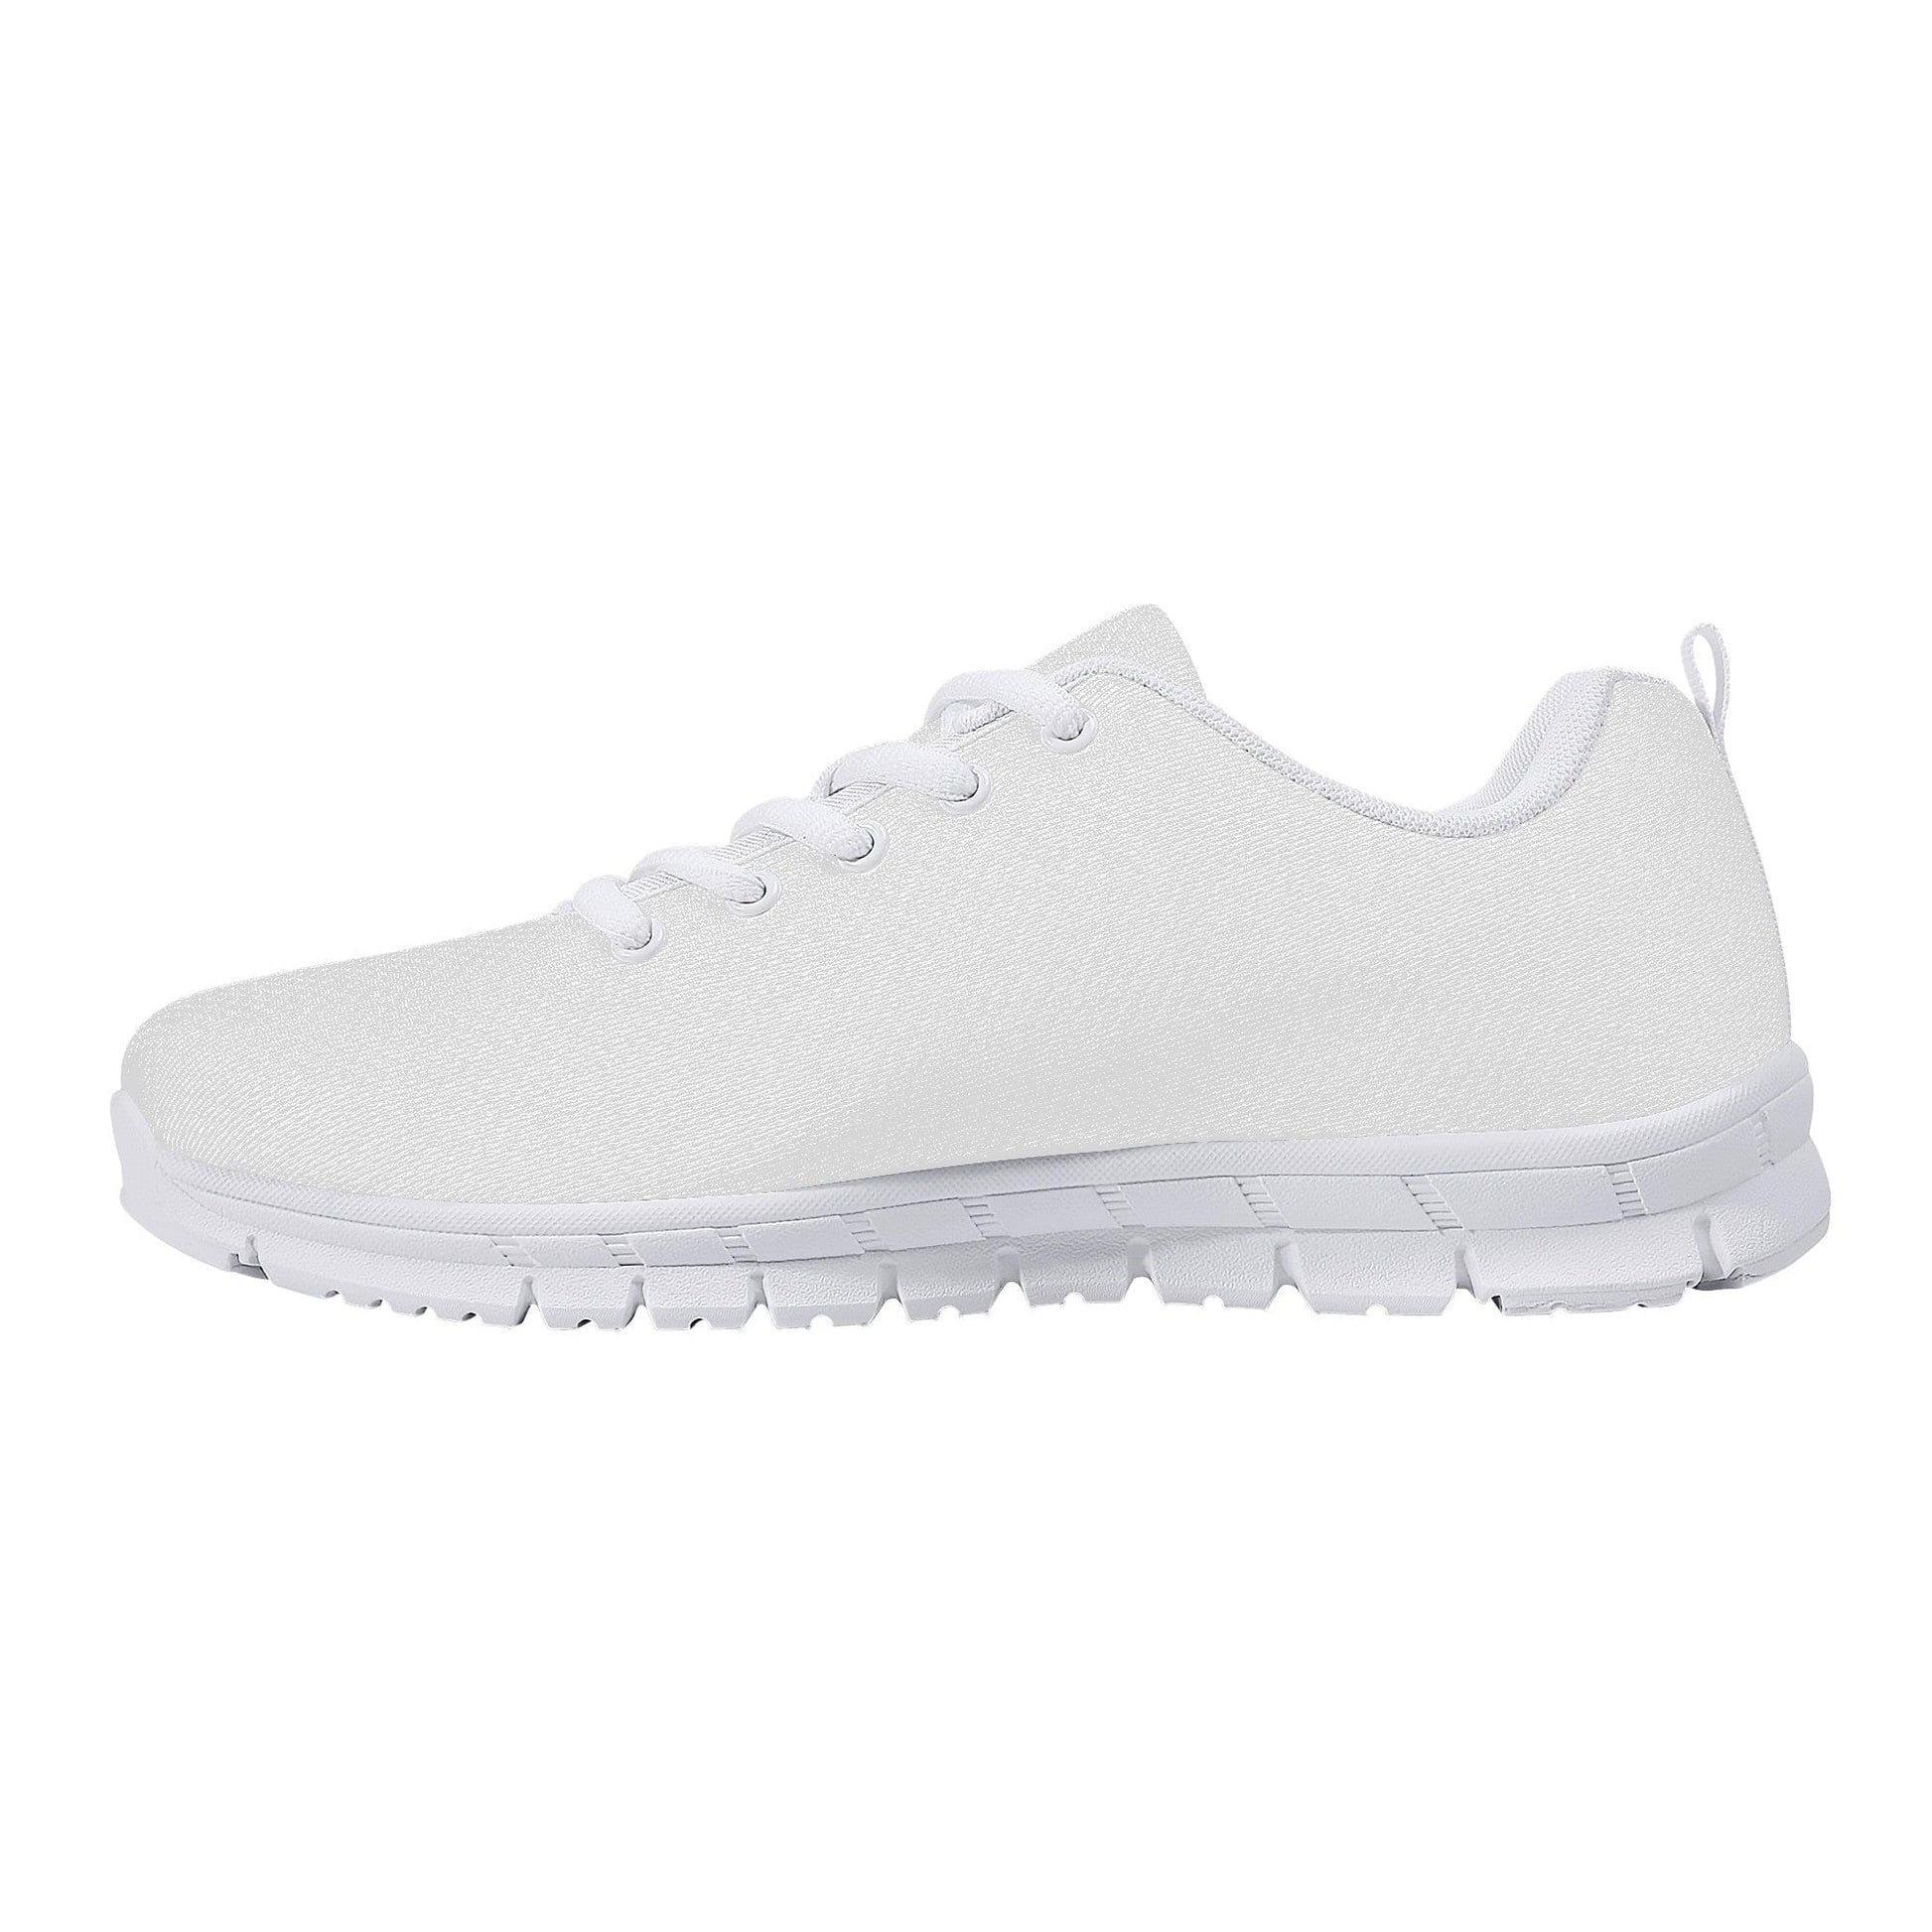 Custom Running Shoes - White D23 Comfort Colloid Colors 